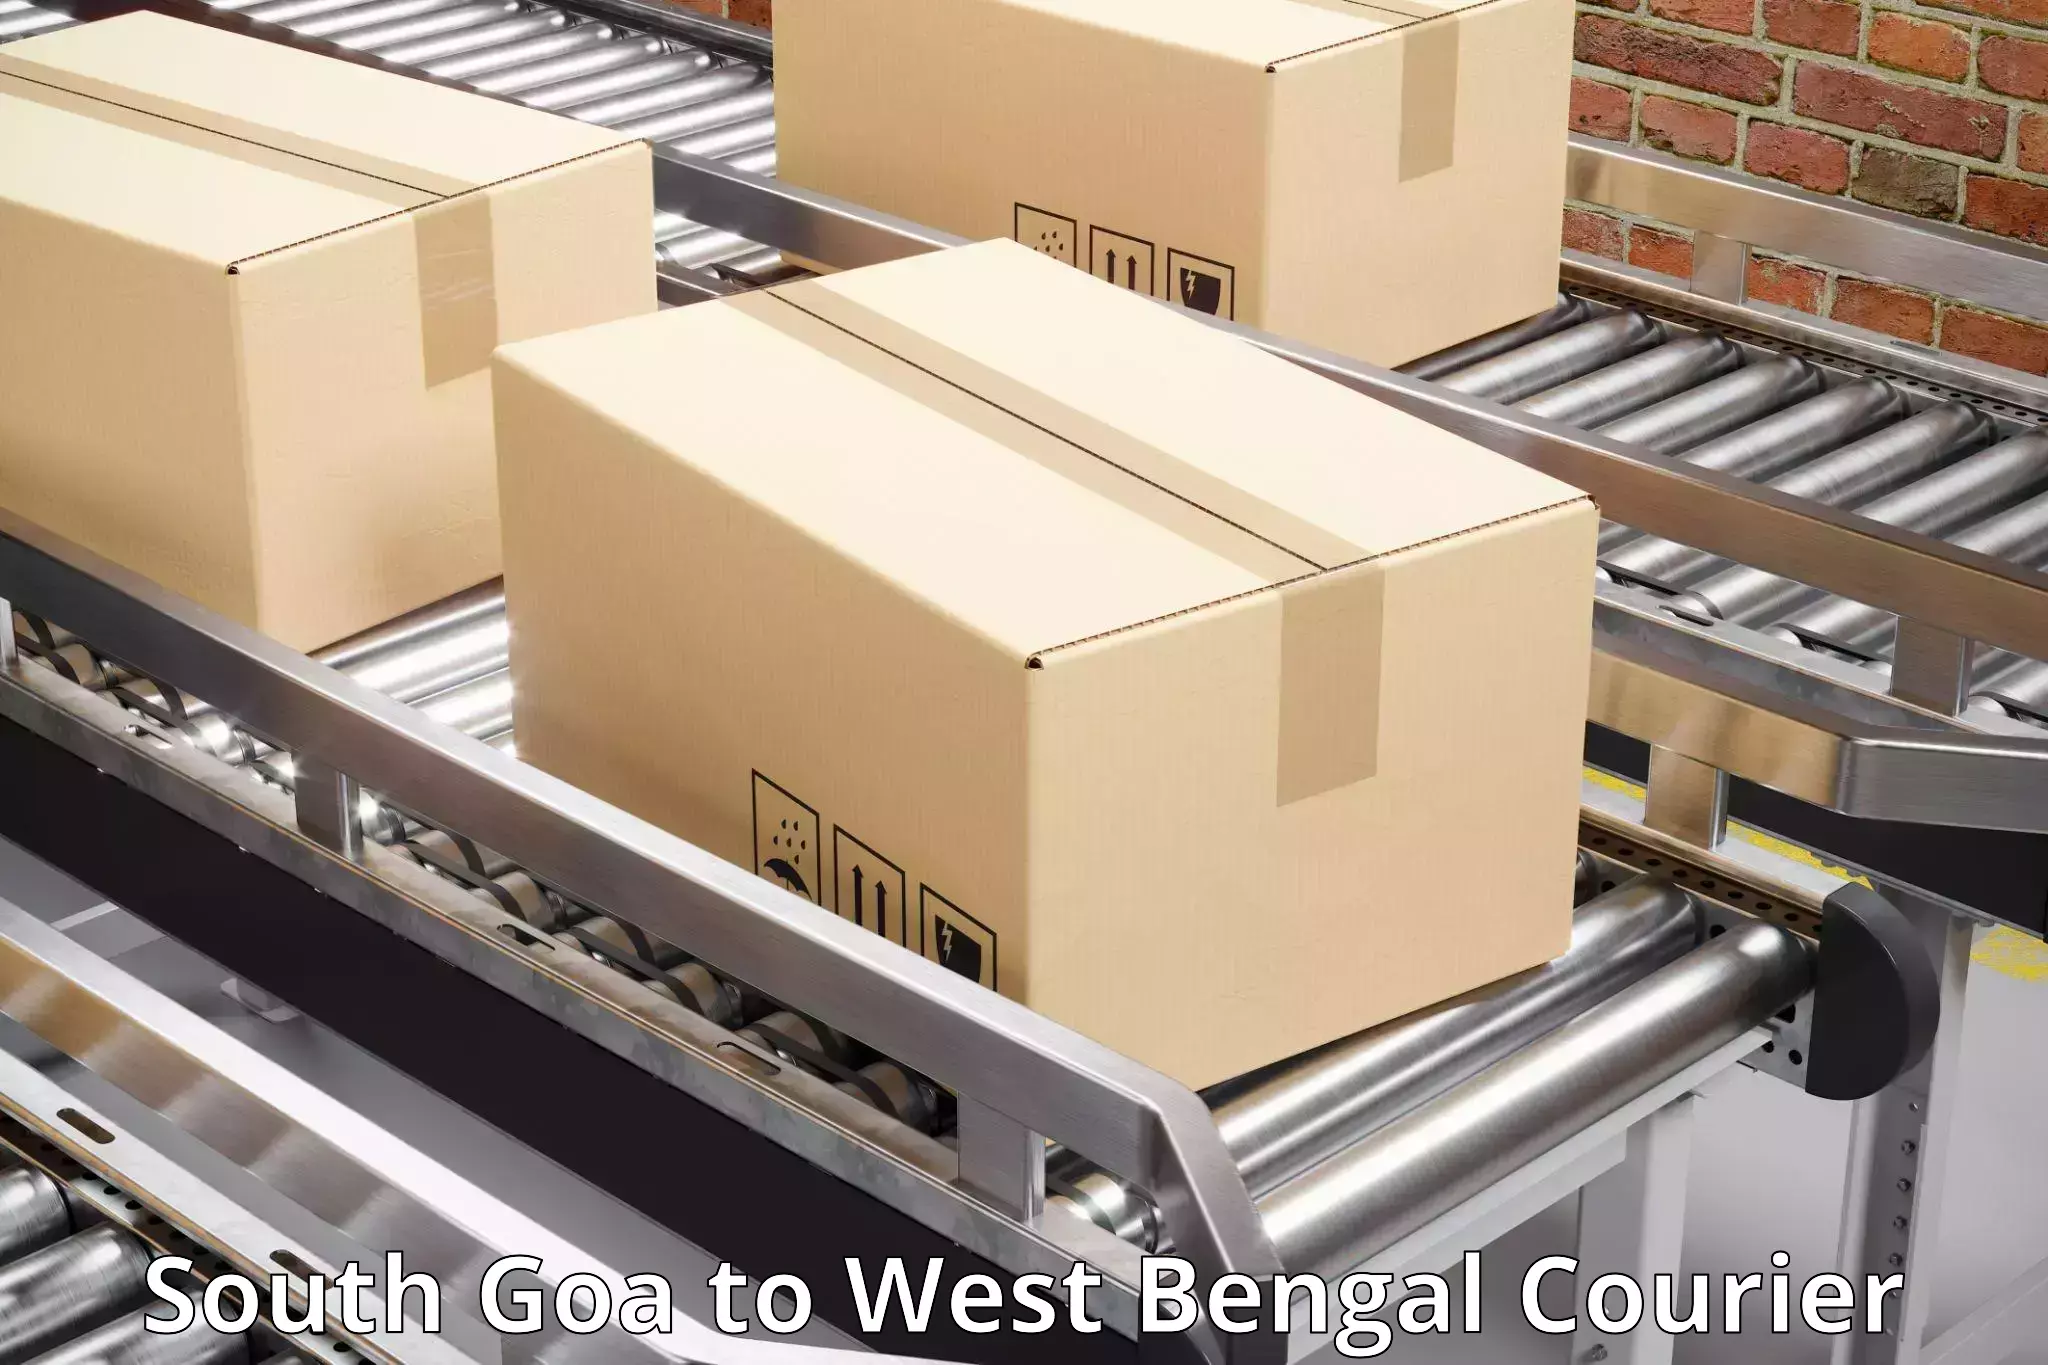 Courier rate comparison South Goa to IIIT Kalyani